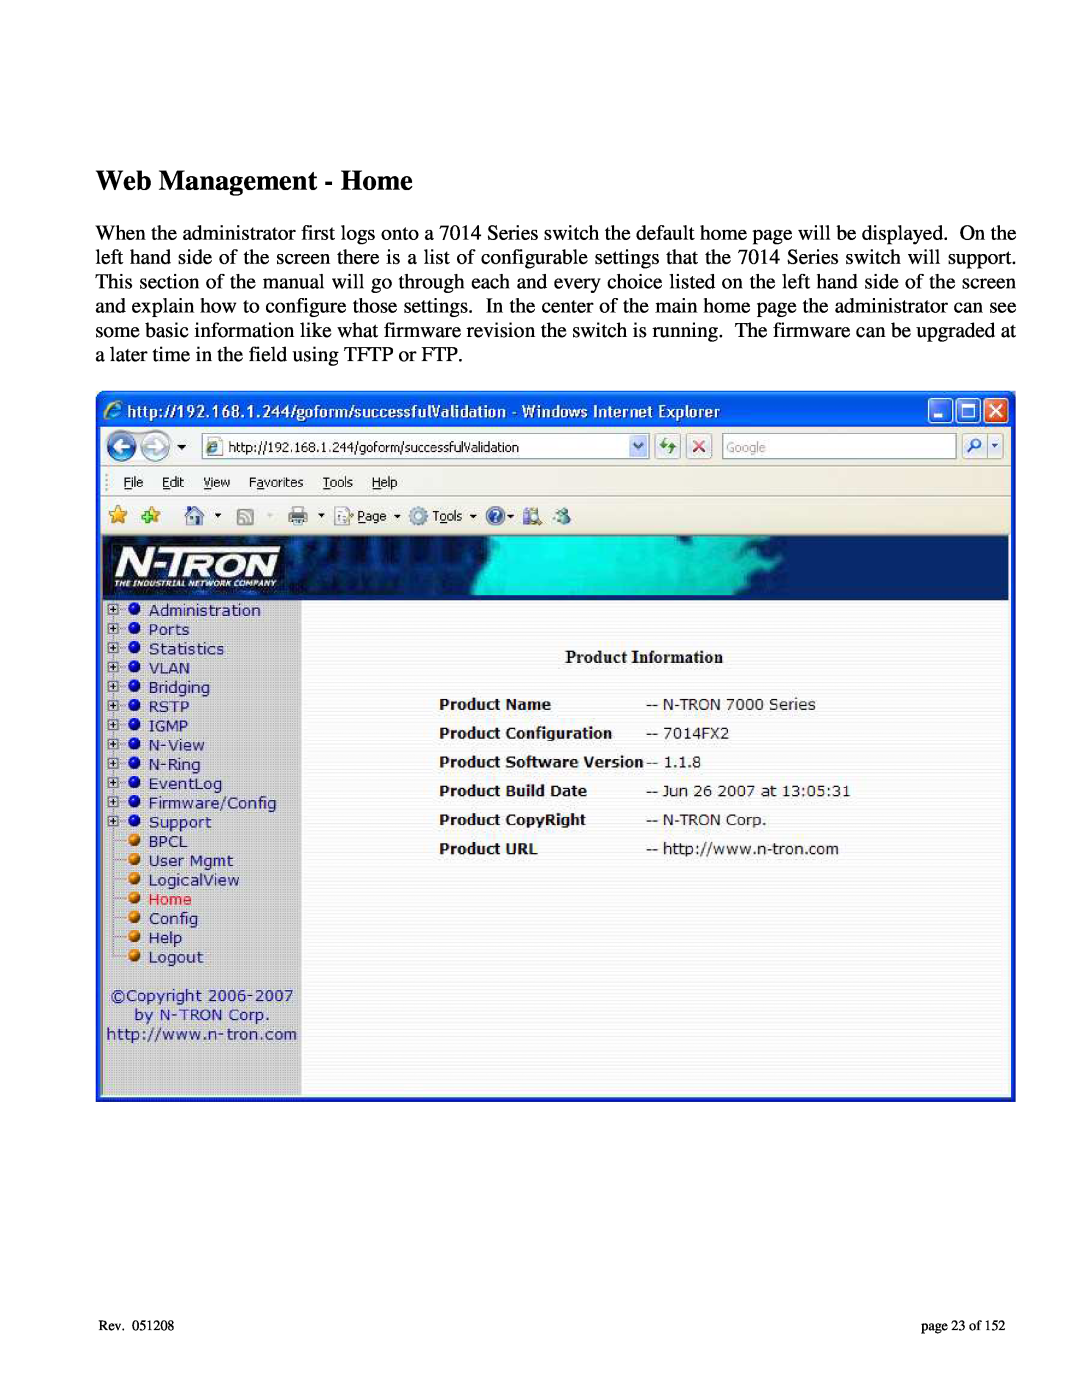 Gigabyte 7014 user manual Web Management - Home, page 23 of 